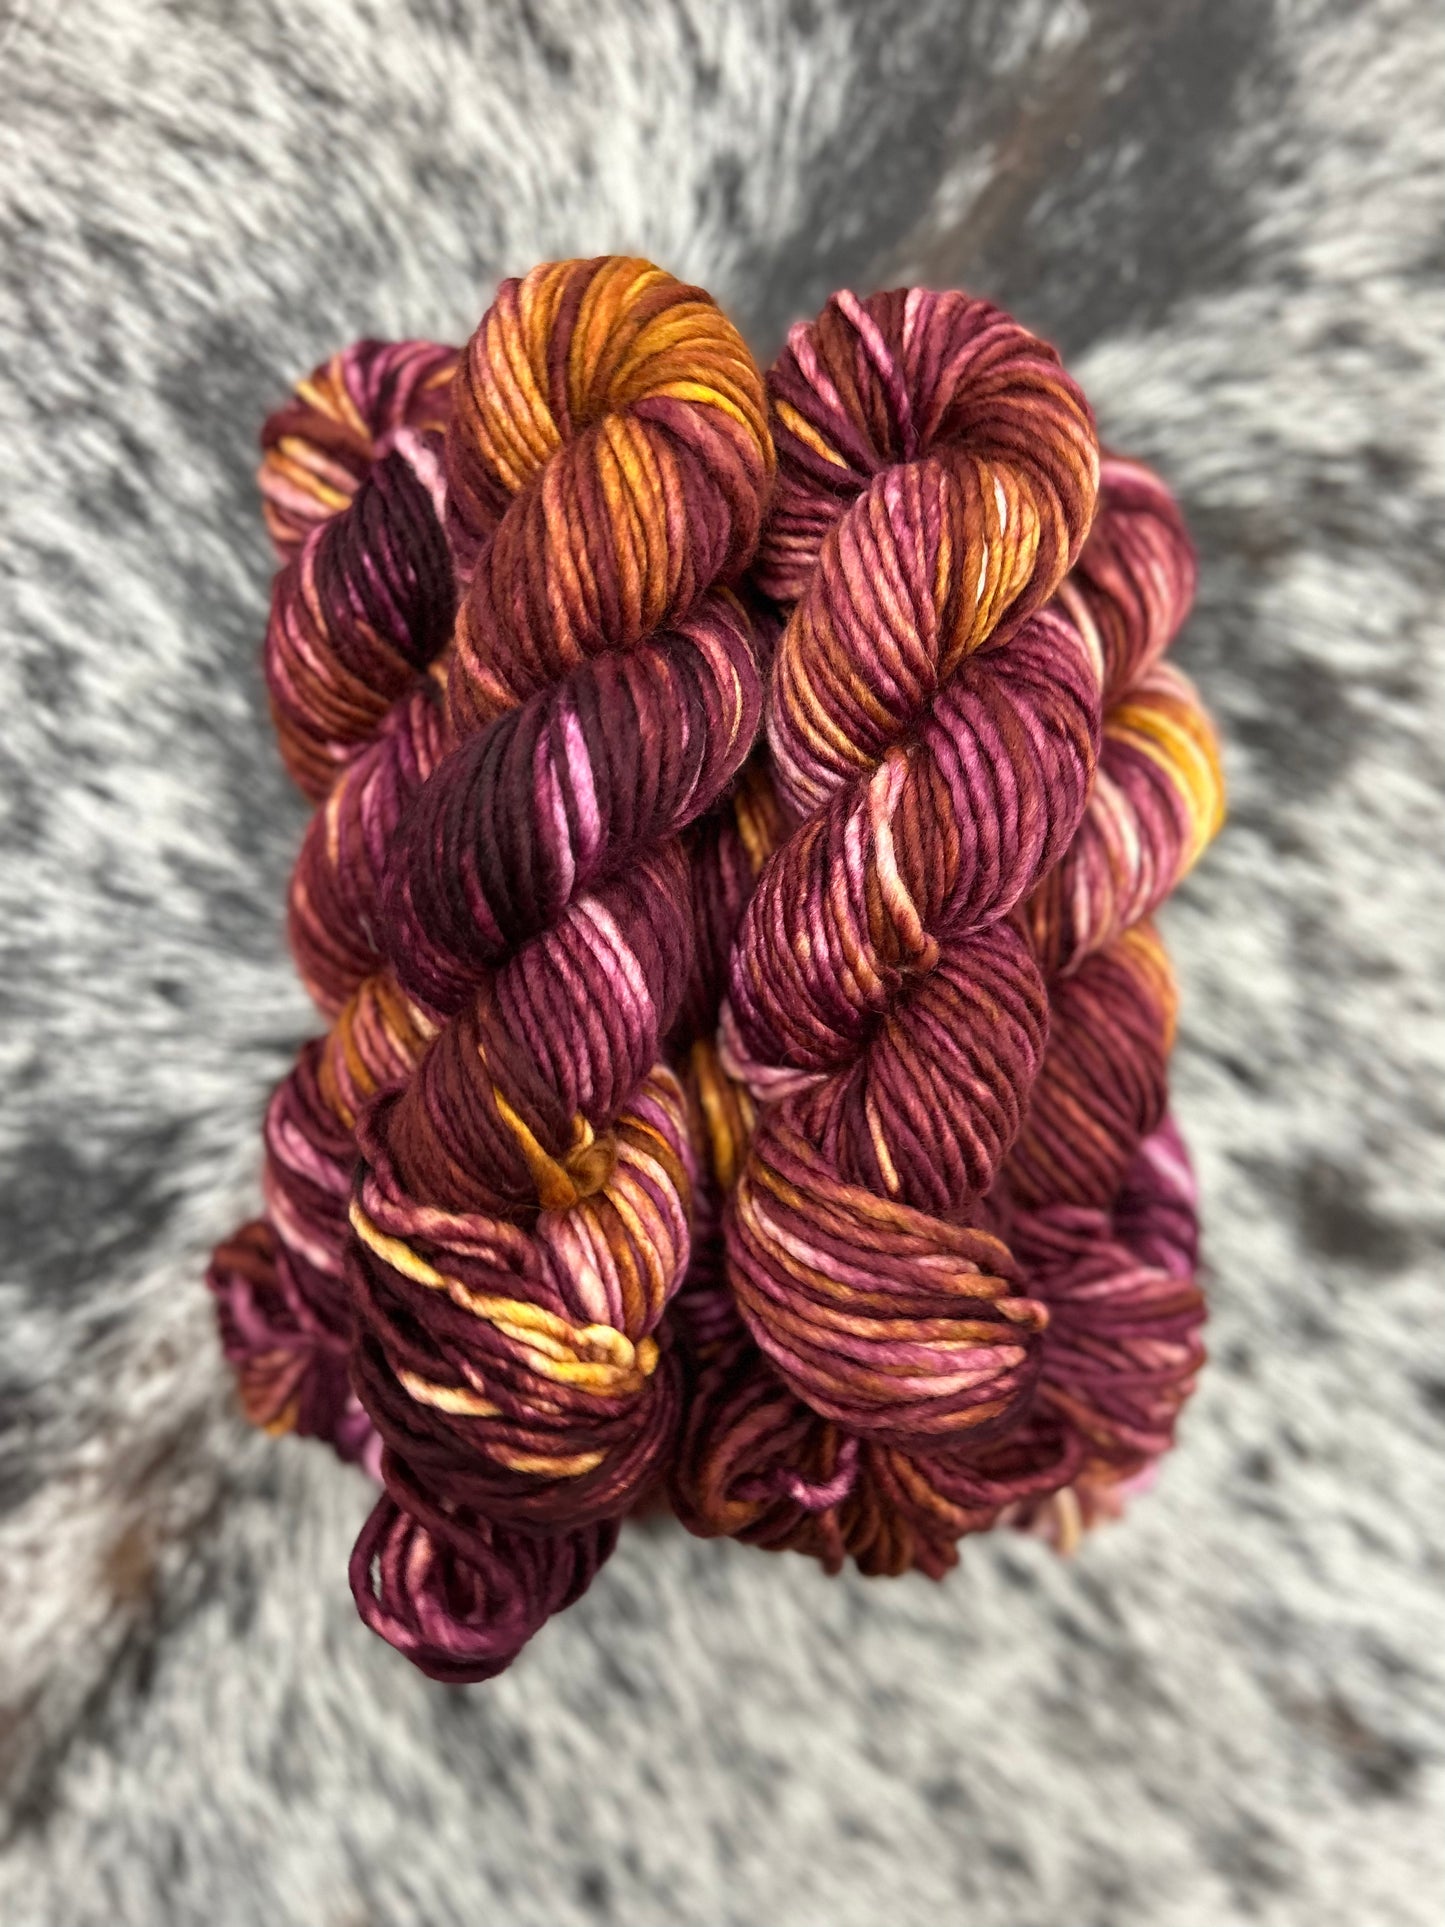 "Old Fashioned" Hand-Dyed Yarn